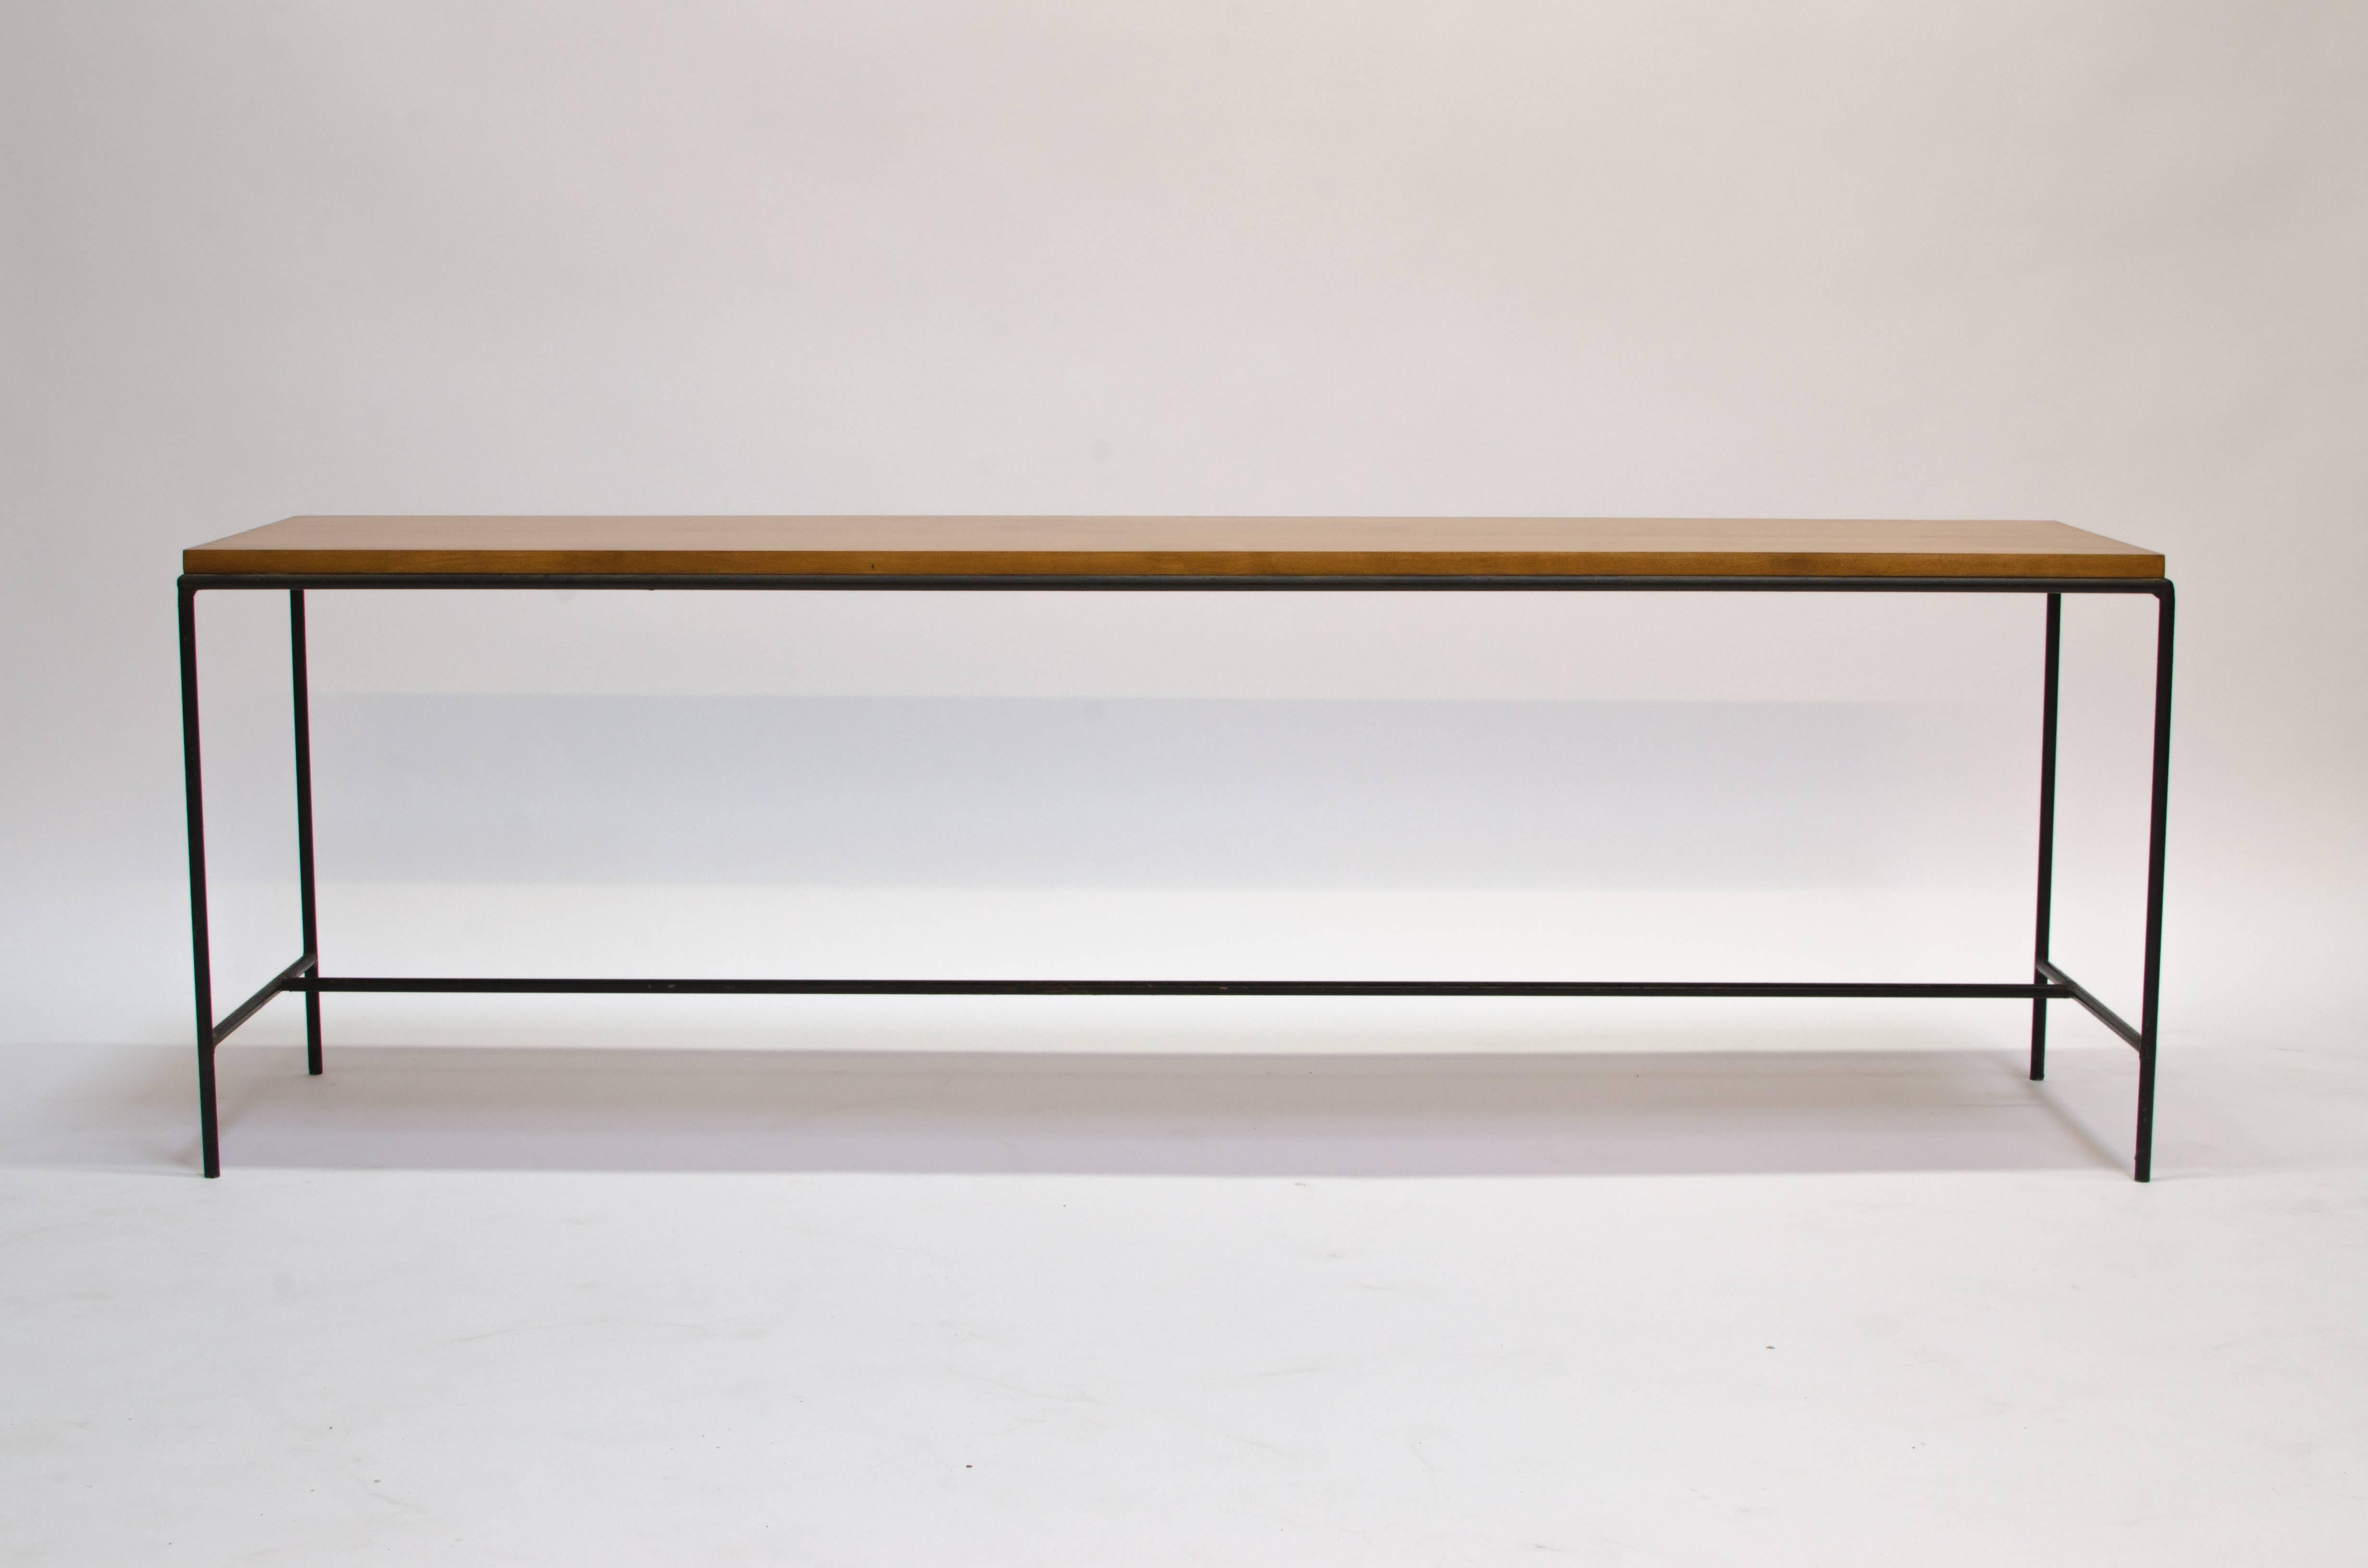 Minimalist wood and iron bench designed by Paul McCobb, c1950s. 